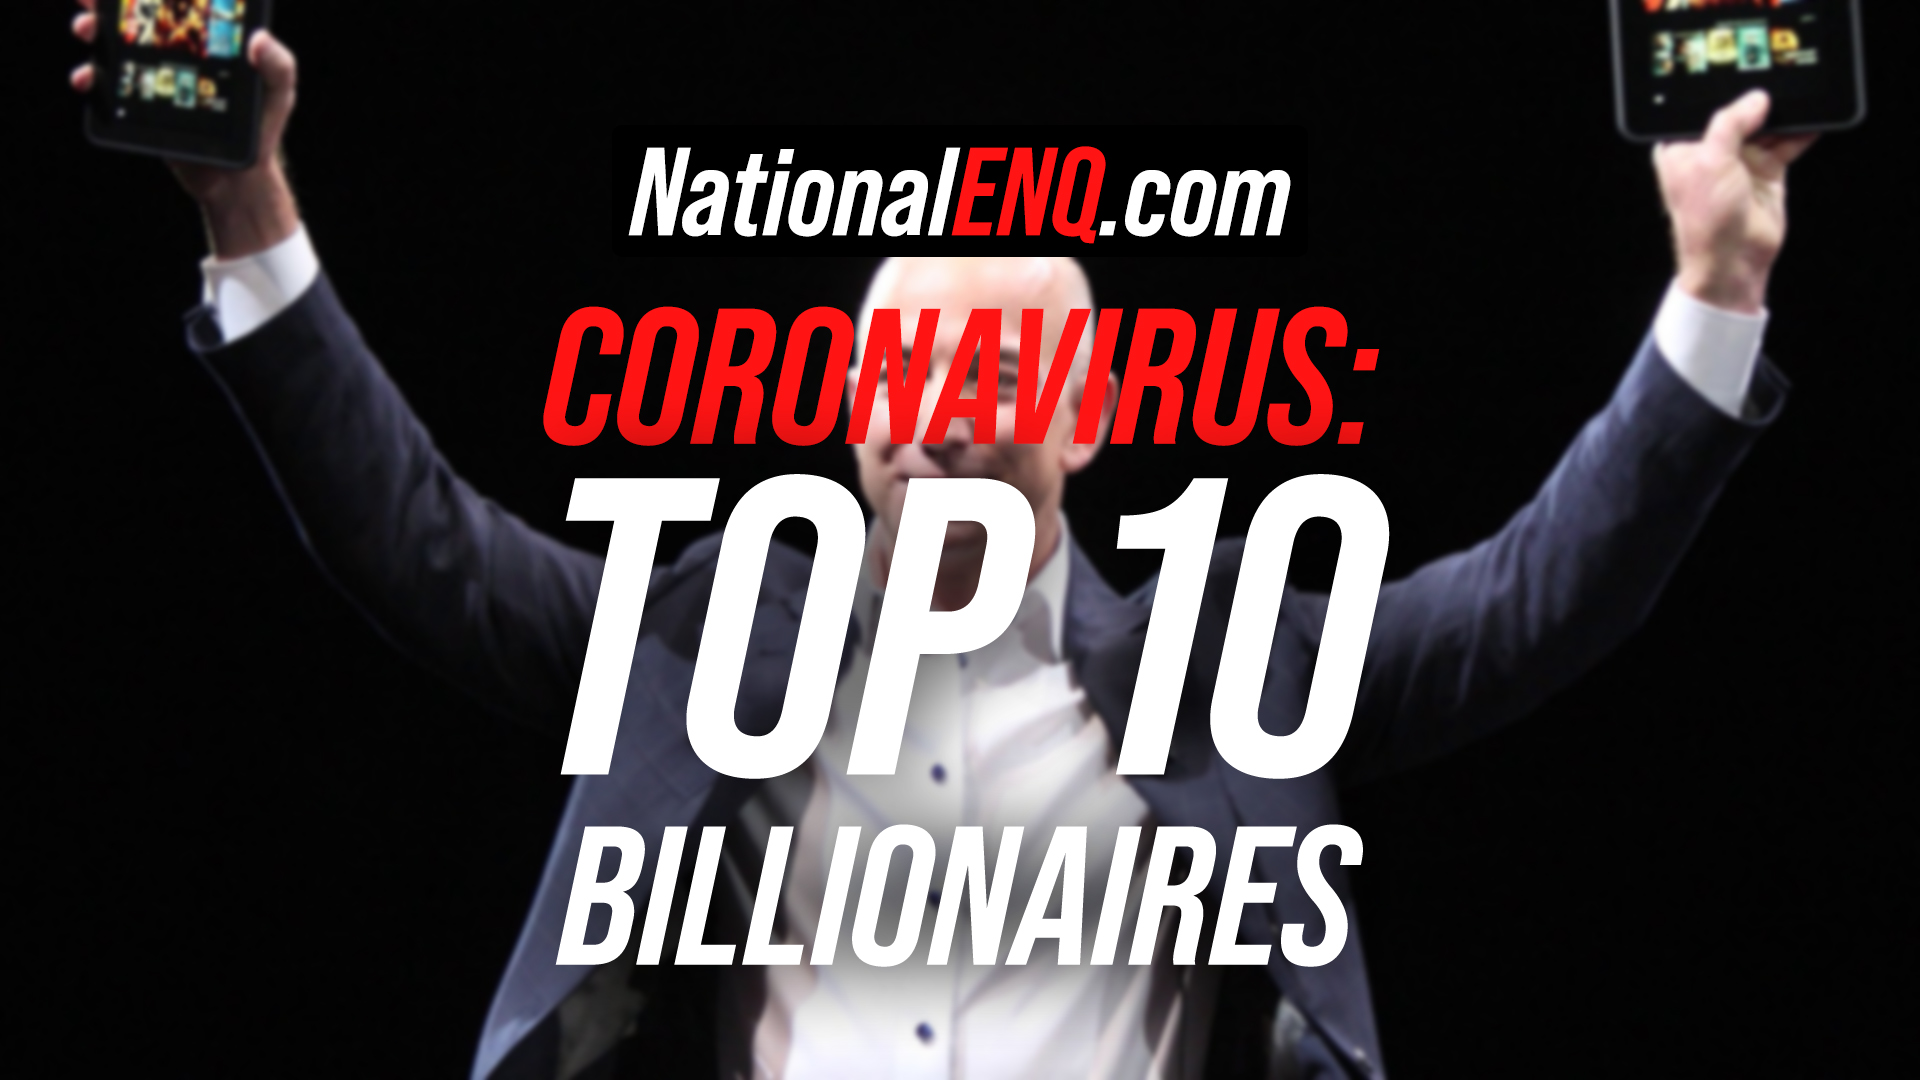 National ENQ Coronavirus (COVID-19) News: Top Ten Billionaires – The Richest People in the World, by Cash Available or Cash Equivalent – Top 10 Richest People